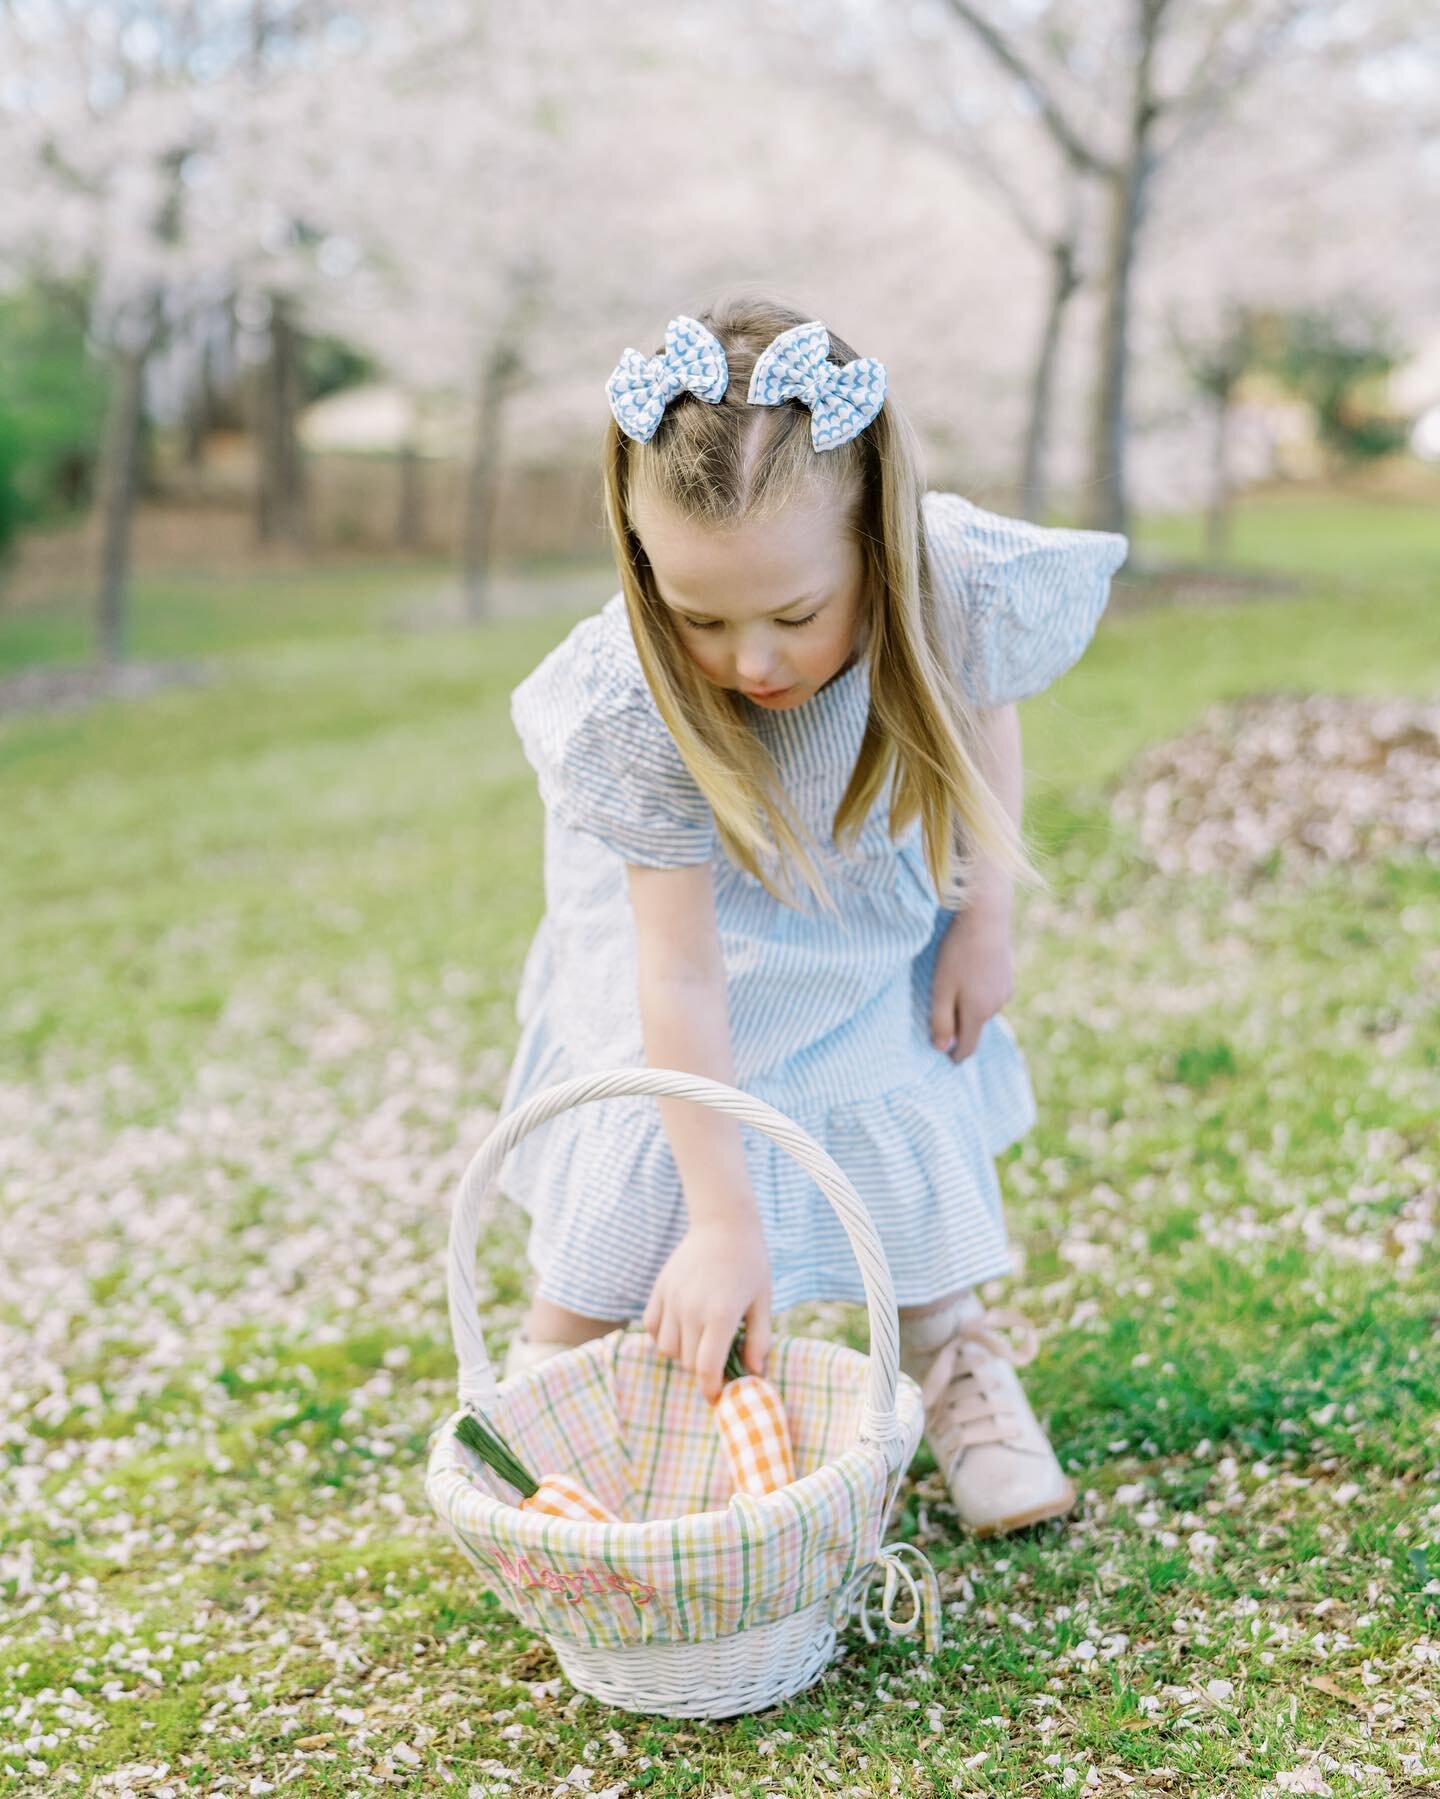 Happy Easter! 🐰 

#miraclemayley #easterbunny #easteroutfit #easterpics